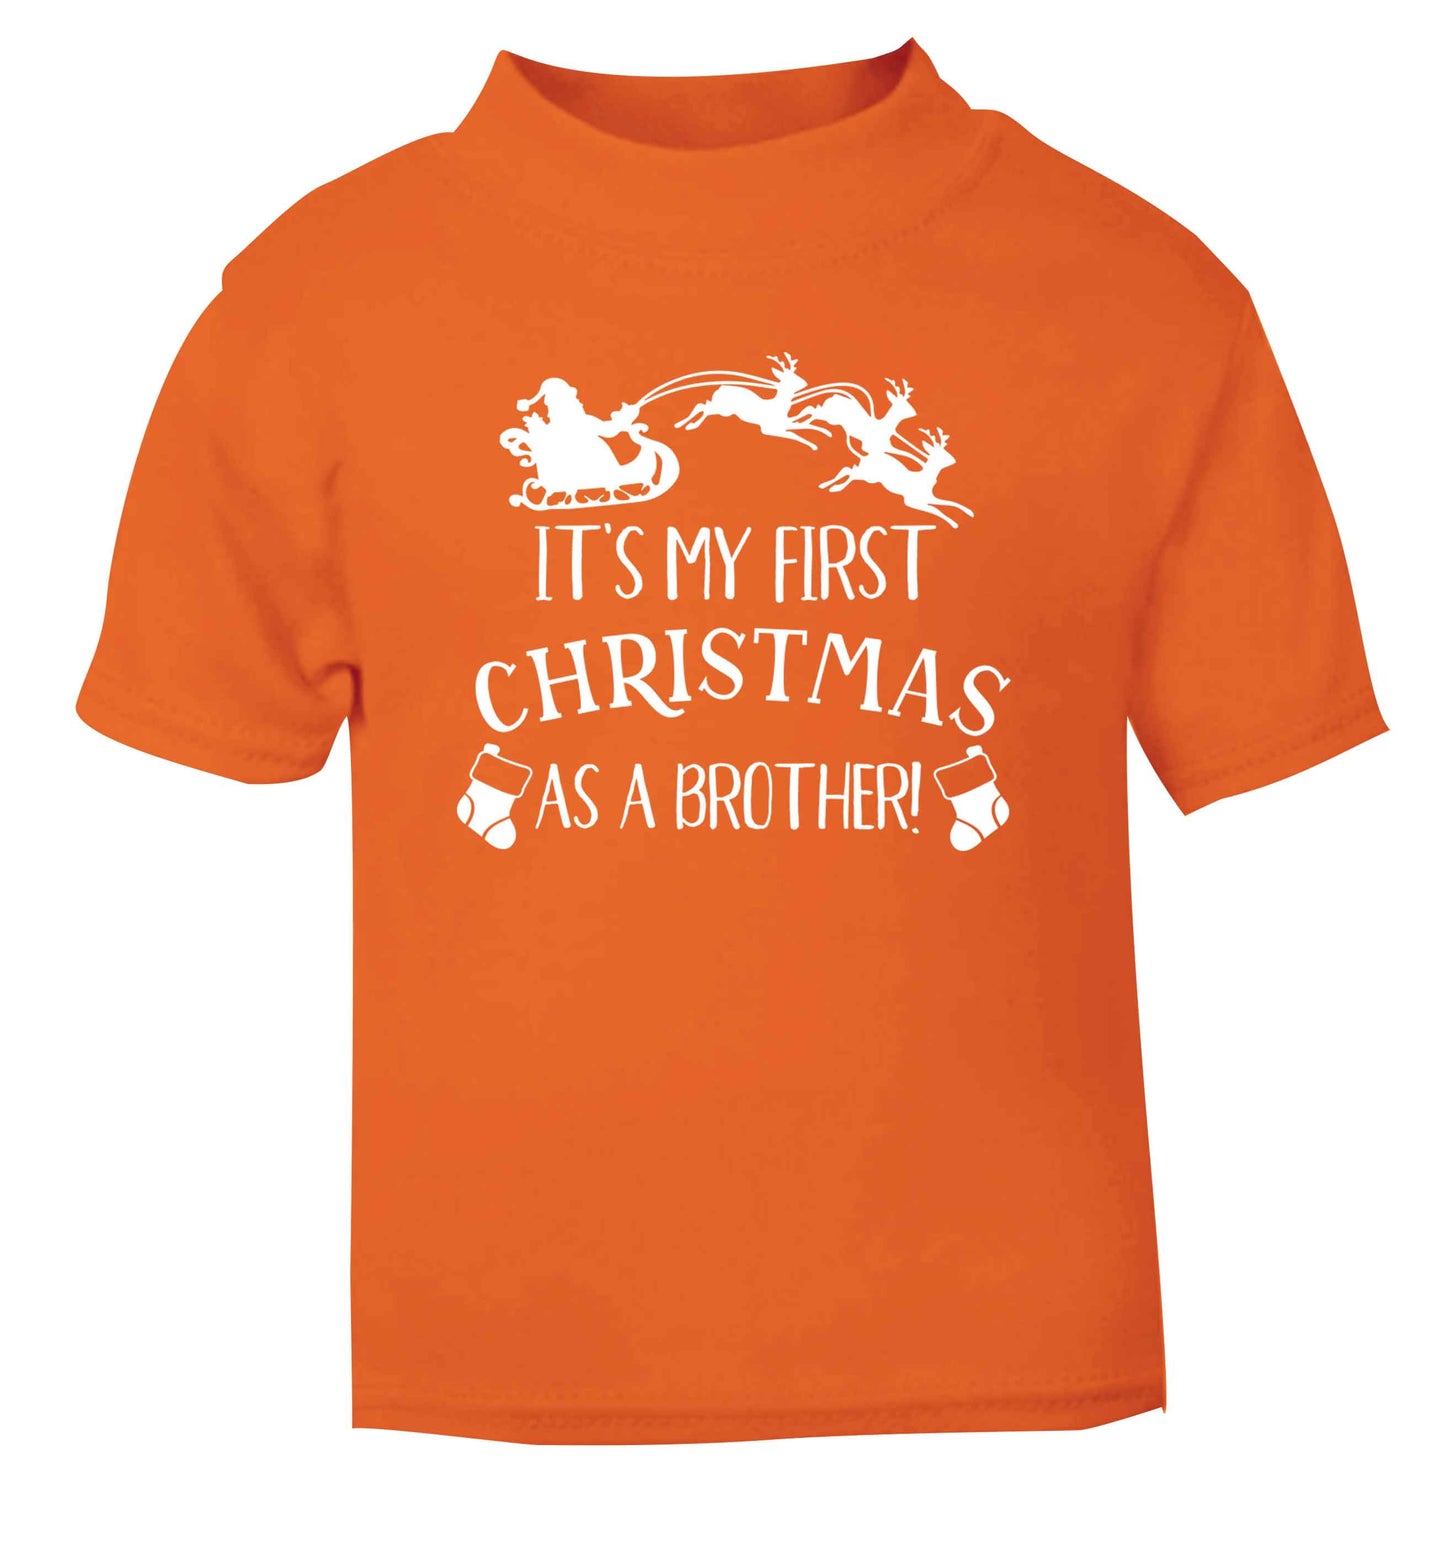 It's my first Christmas as a brother! orange Baby Toddler Tshirt 2 Years